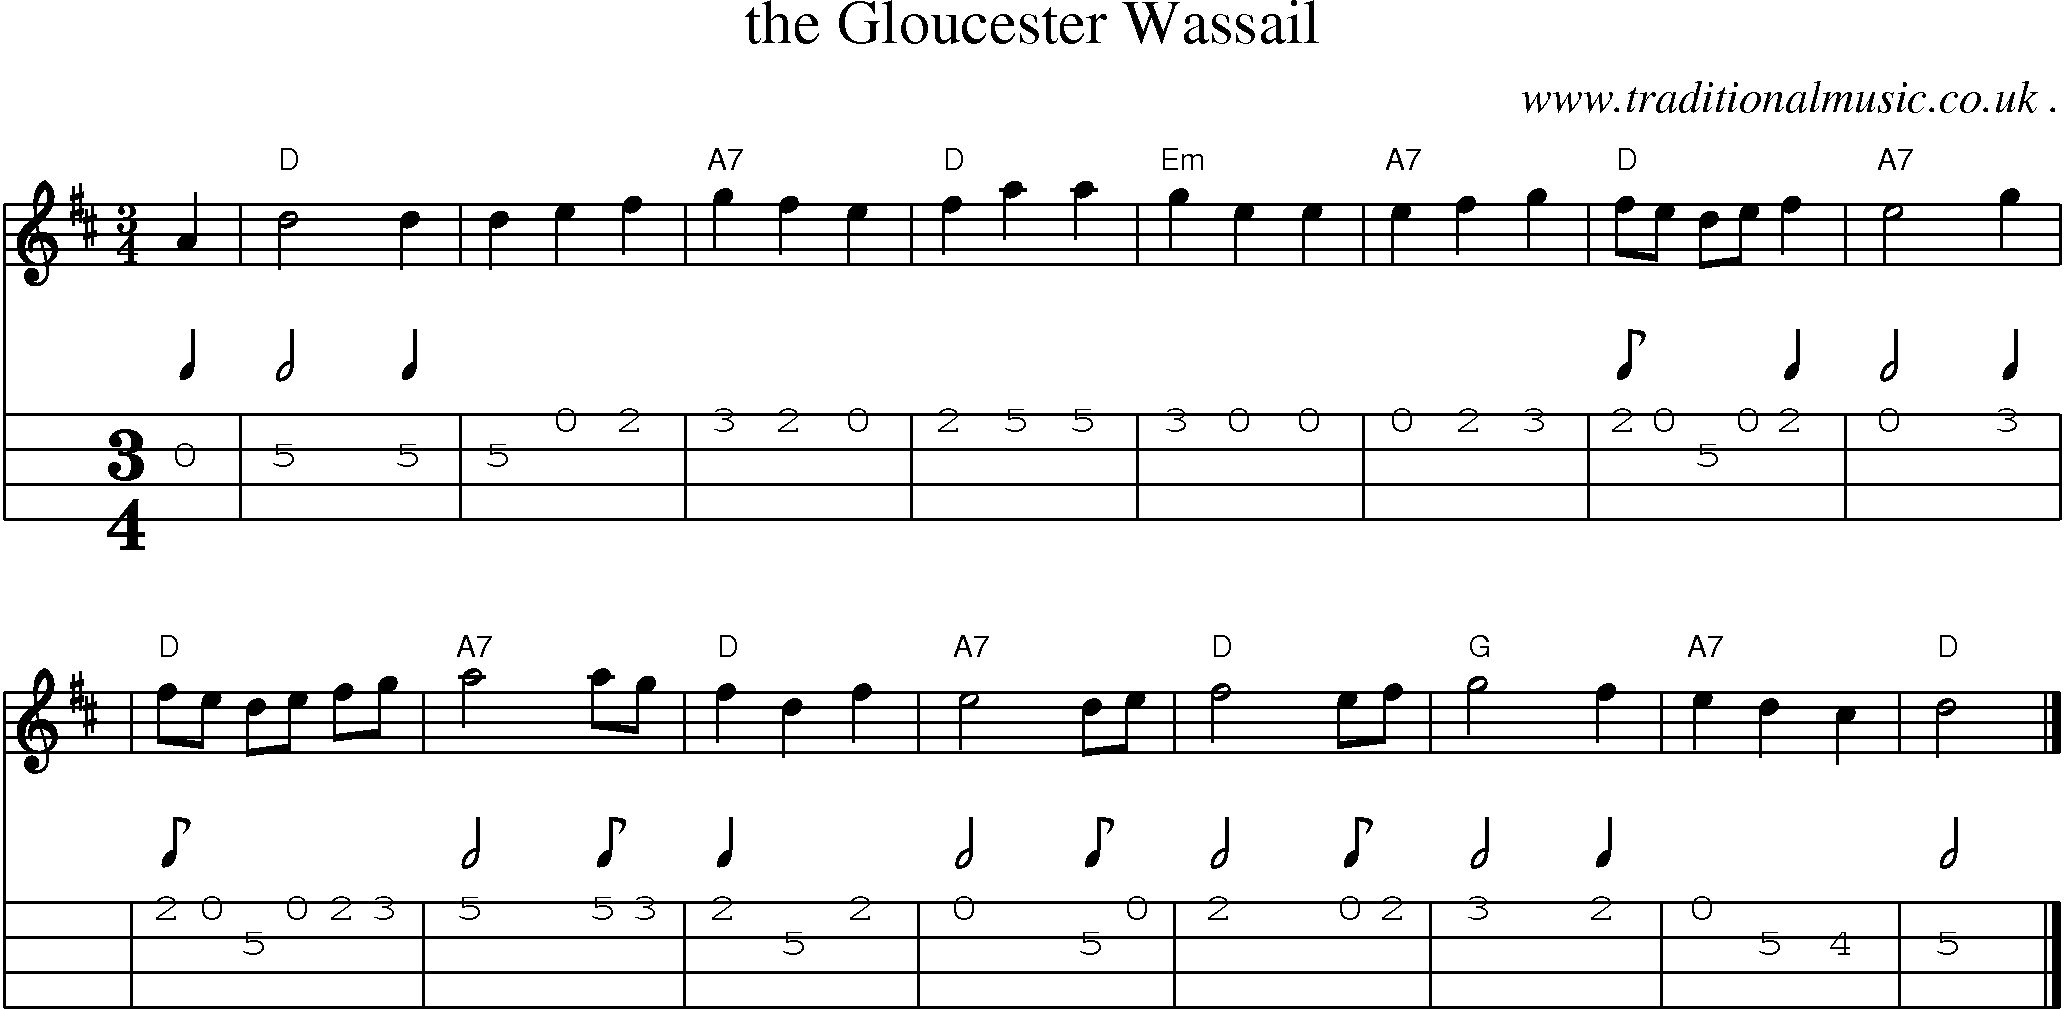 Sheet-music  score, Chords and Mandolin Tabs for The Gloucester Wassail